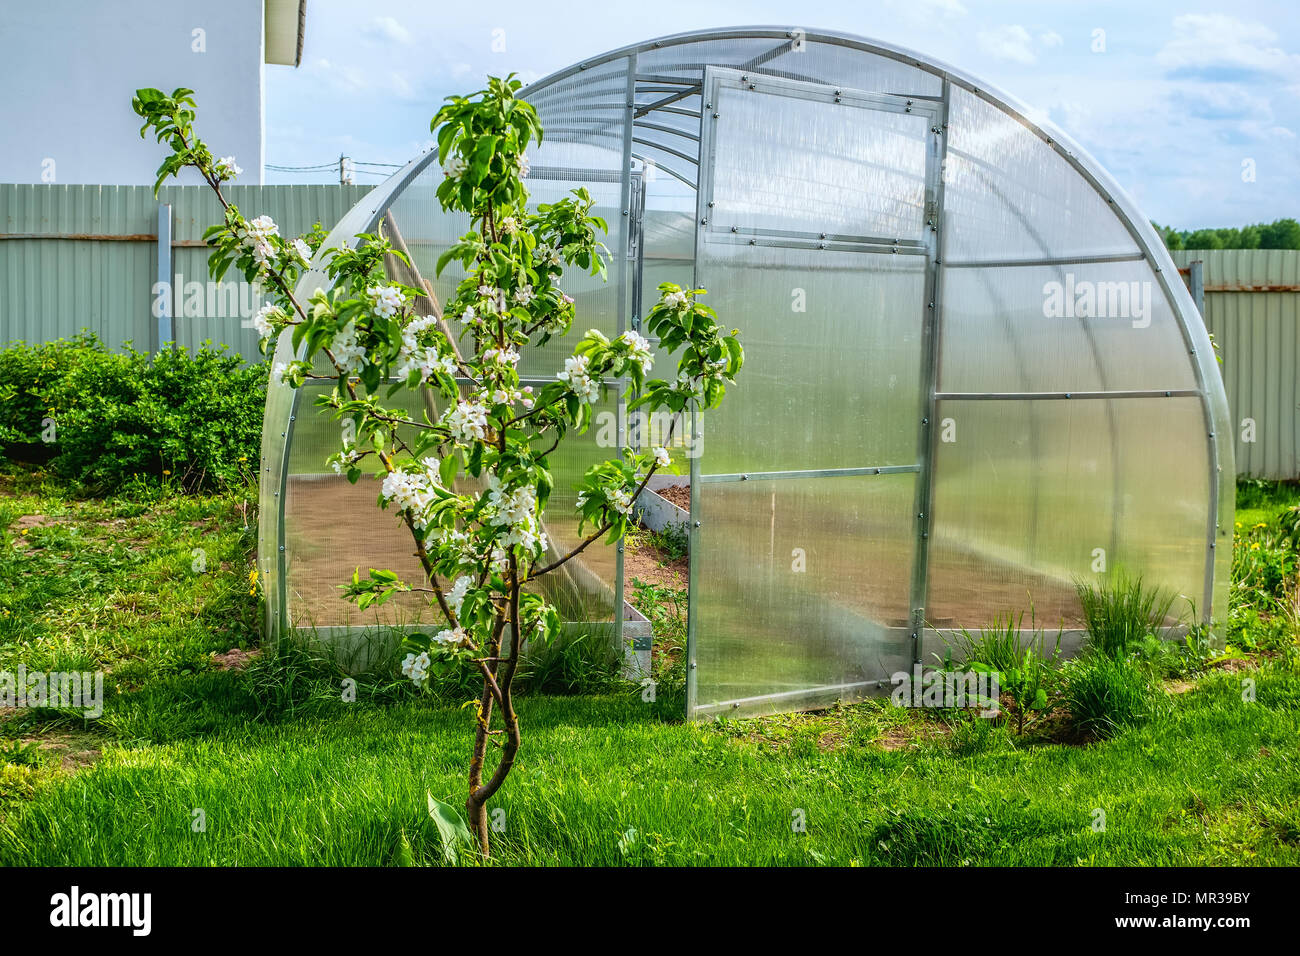 Greenhouse made of plastic for growing green vegetables. City garden Stock  Photo - Alamy